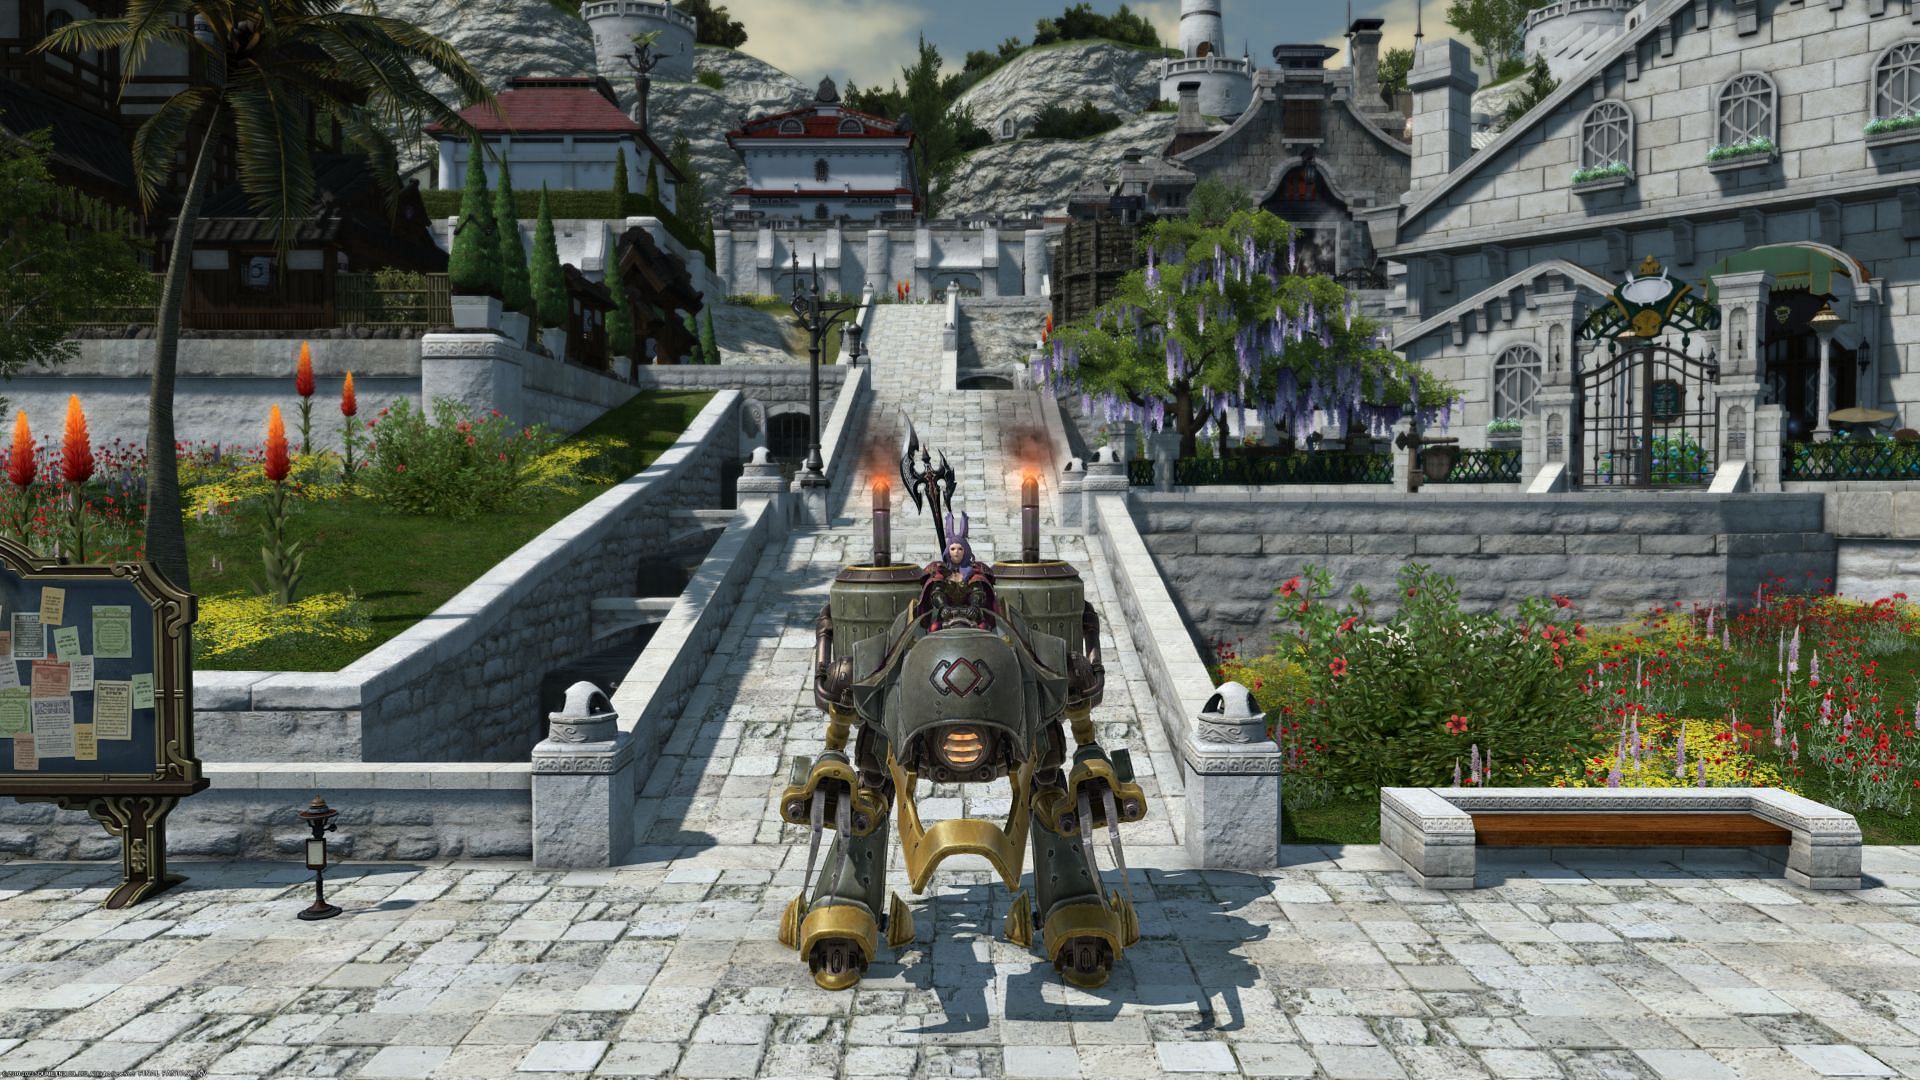 Final Fantasy XIV has quite a few awesome mounts that drop in dungeons and raids